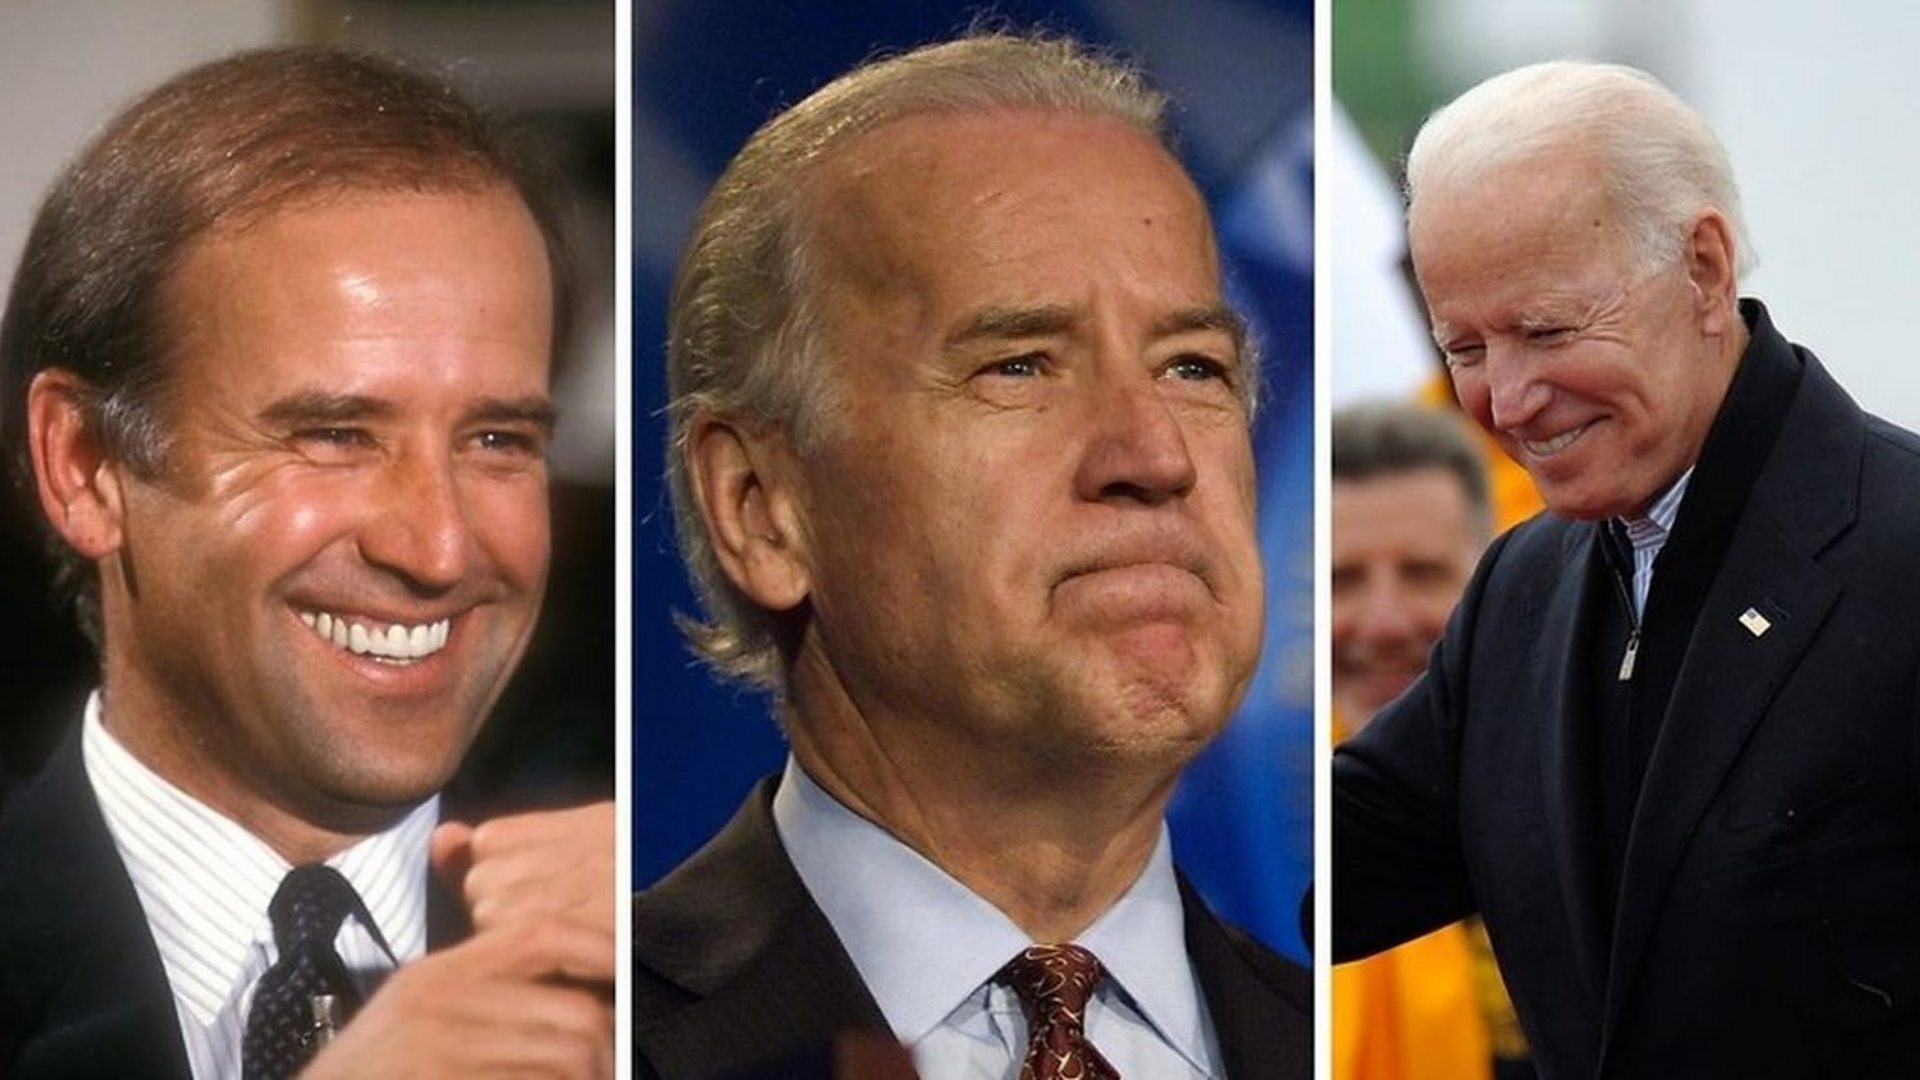 who will be joe biden running mate - Biden|President|Joe|Years|Trump|Delaware|Vice|Time|Obama|Senate|States|Law|Age|Campaign|Election|Administration|Family|House|Senator|Office|School|Wife|People|Hunter|University|Act|State|Year|Life|Party|Committee|Children|Beau|Daughter|War|Jill|Day|Facts|Americans|Presidency|Joe Biden|United States|Vice President|White House|Law School|President Trump|Foreign Relations Committee|Donald Trump|President Biden|Presidential Campaign|Presidential Election|Democratic Party|Syracuse University|United Nations|Net Worth|Barack Obama|Judiciary Committee|Neilia Hunter|U.S. Senate|Hillary Clinton|New York Times|Obama Administration|Empty Store Shelves|Systemic Racism|Castle County Council|Archmere Academy|U.S. Senator|Vice Presidency|Second Term|Biden Administration